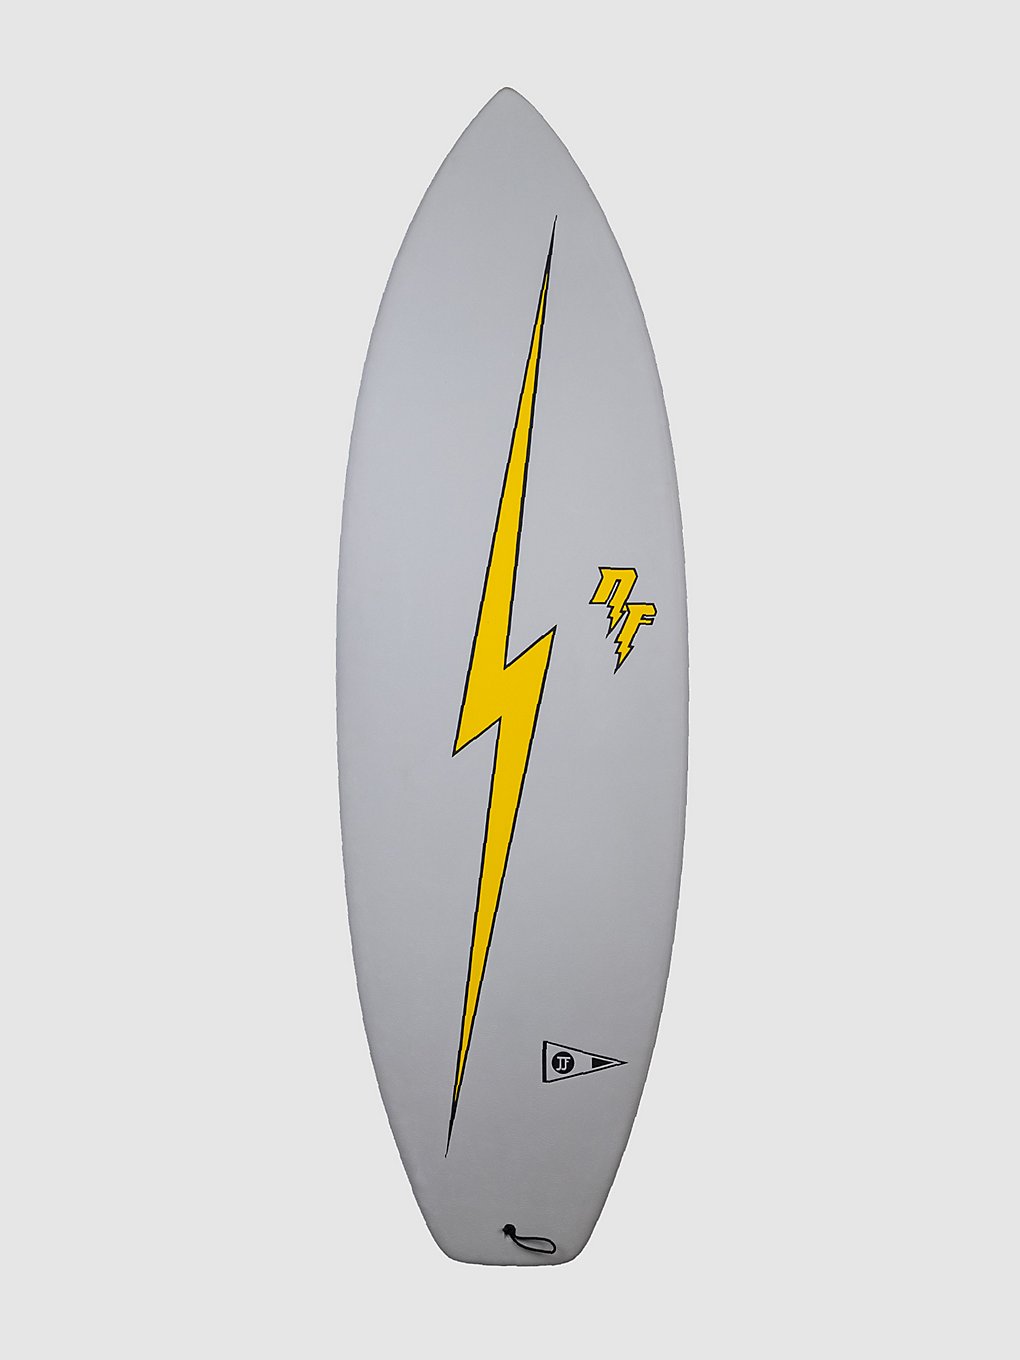 JJF by Pyzel Nathan Florence 5'9 Surfboard grey